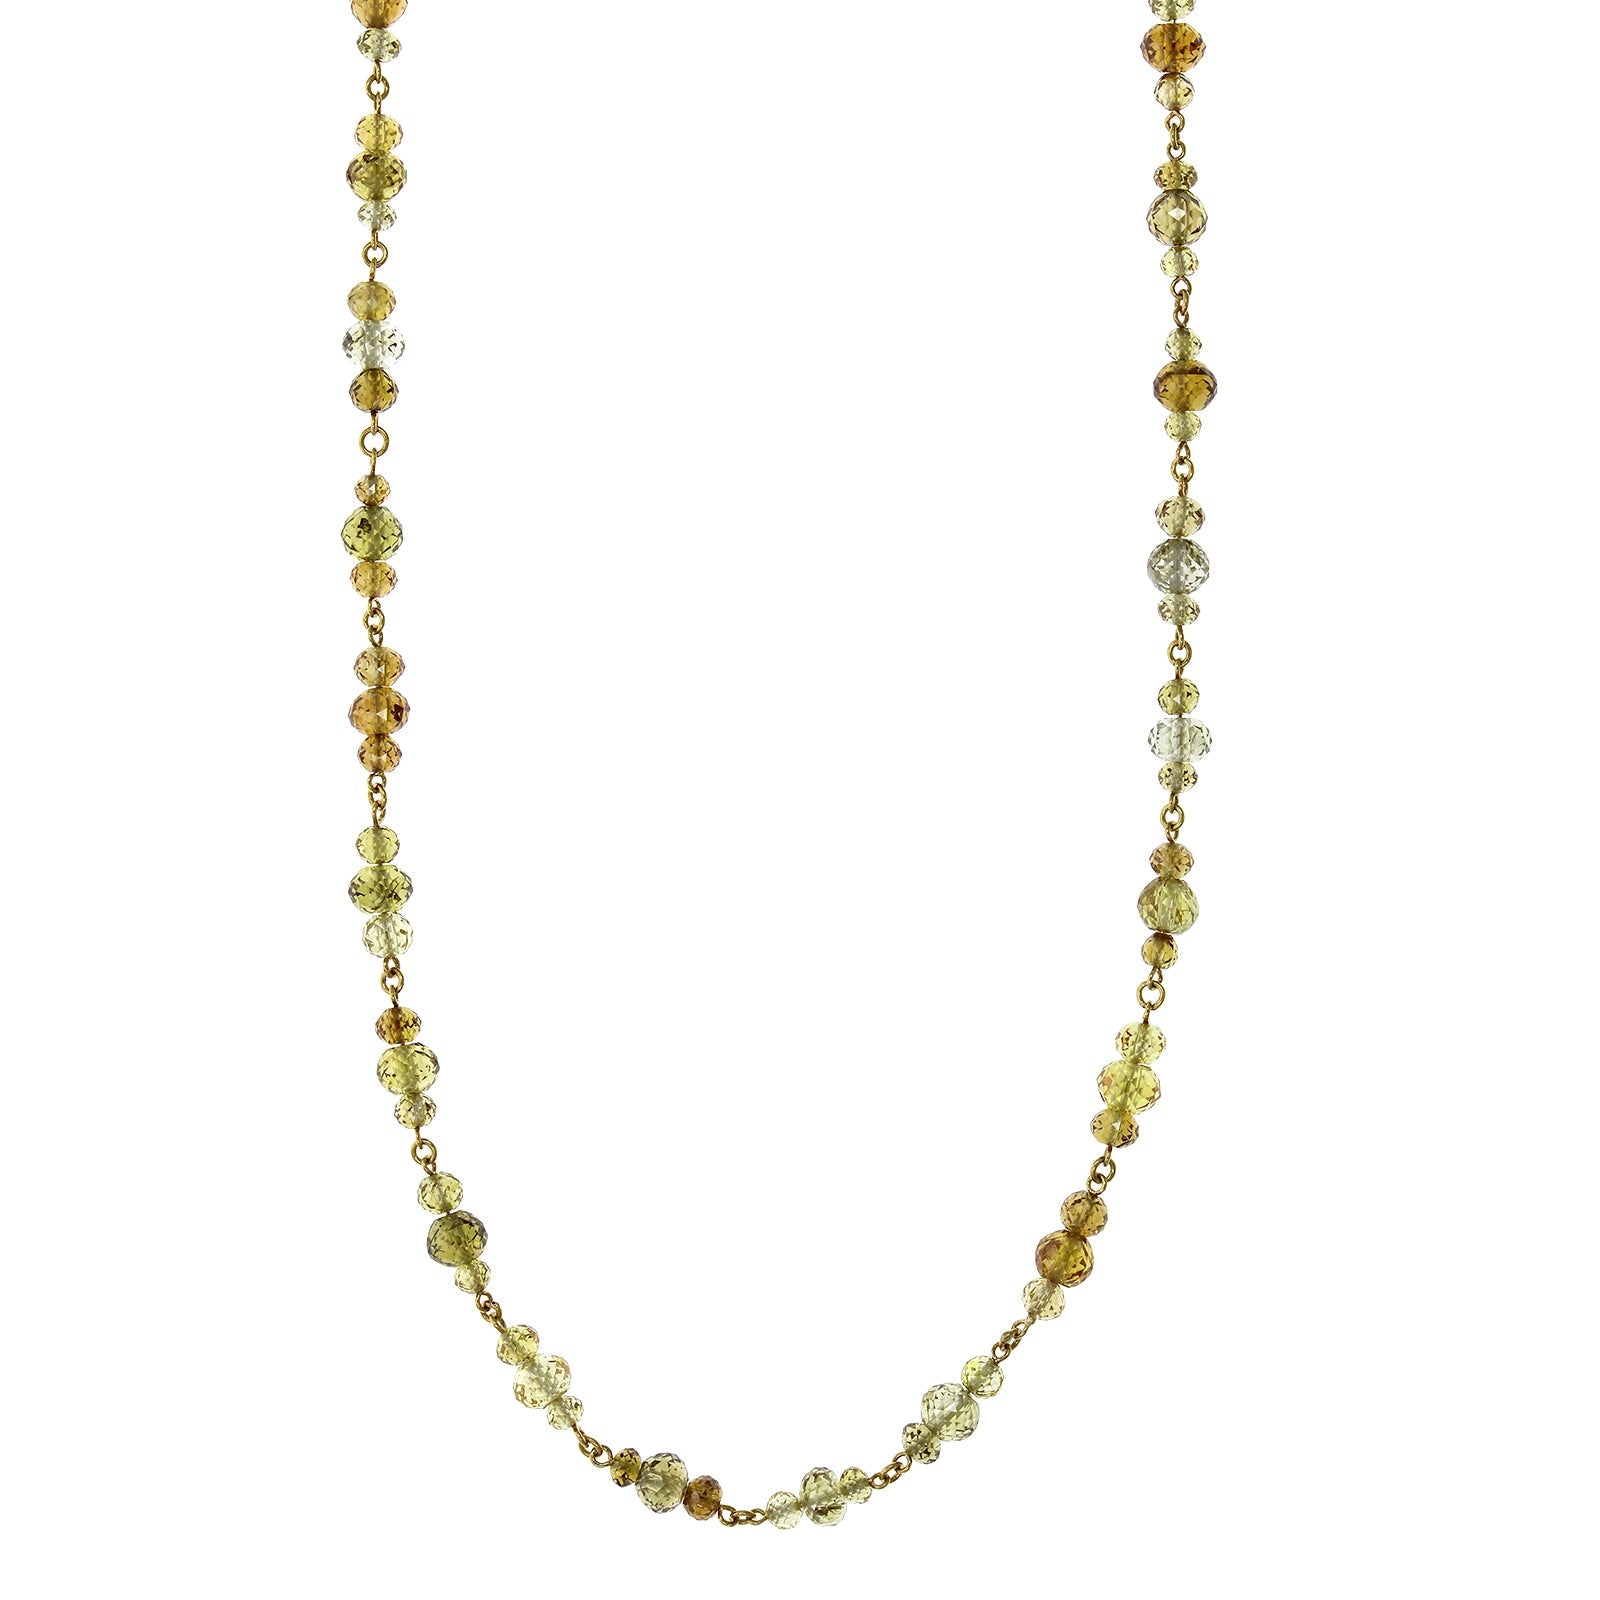 18K Yellow Gold Fancy Colored Diamond Necklace, Long's Jewelers